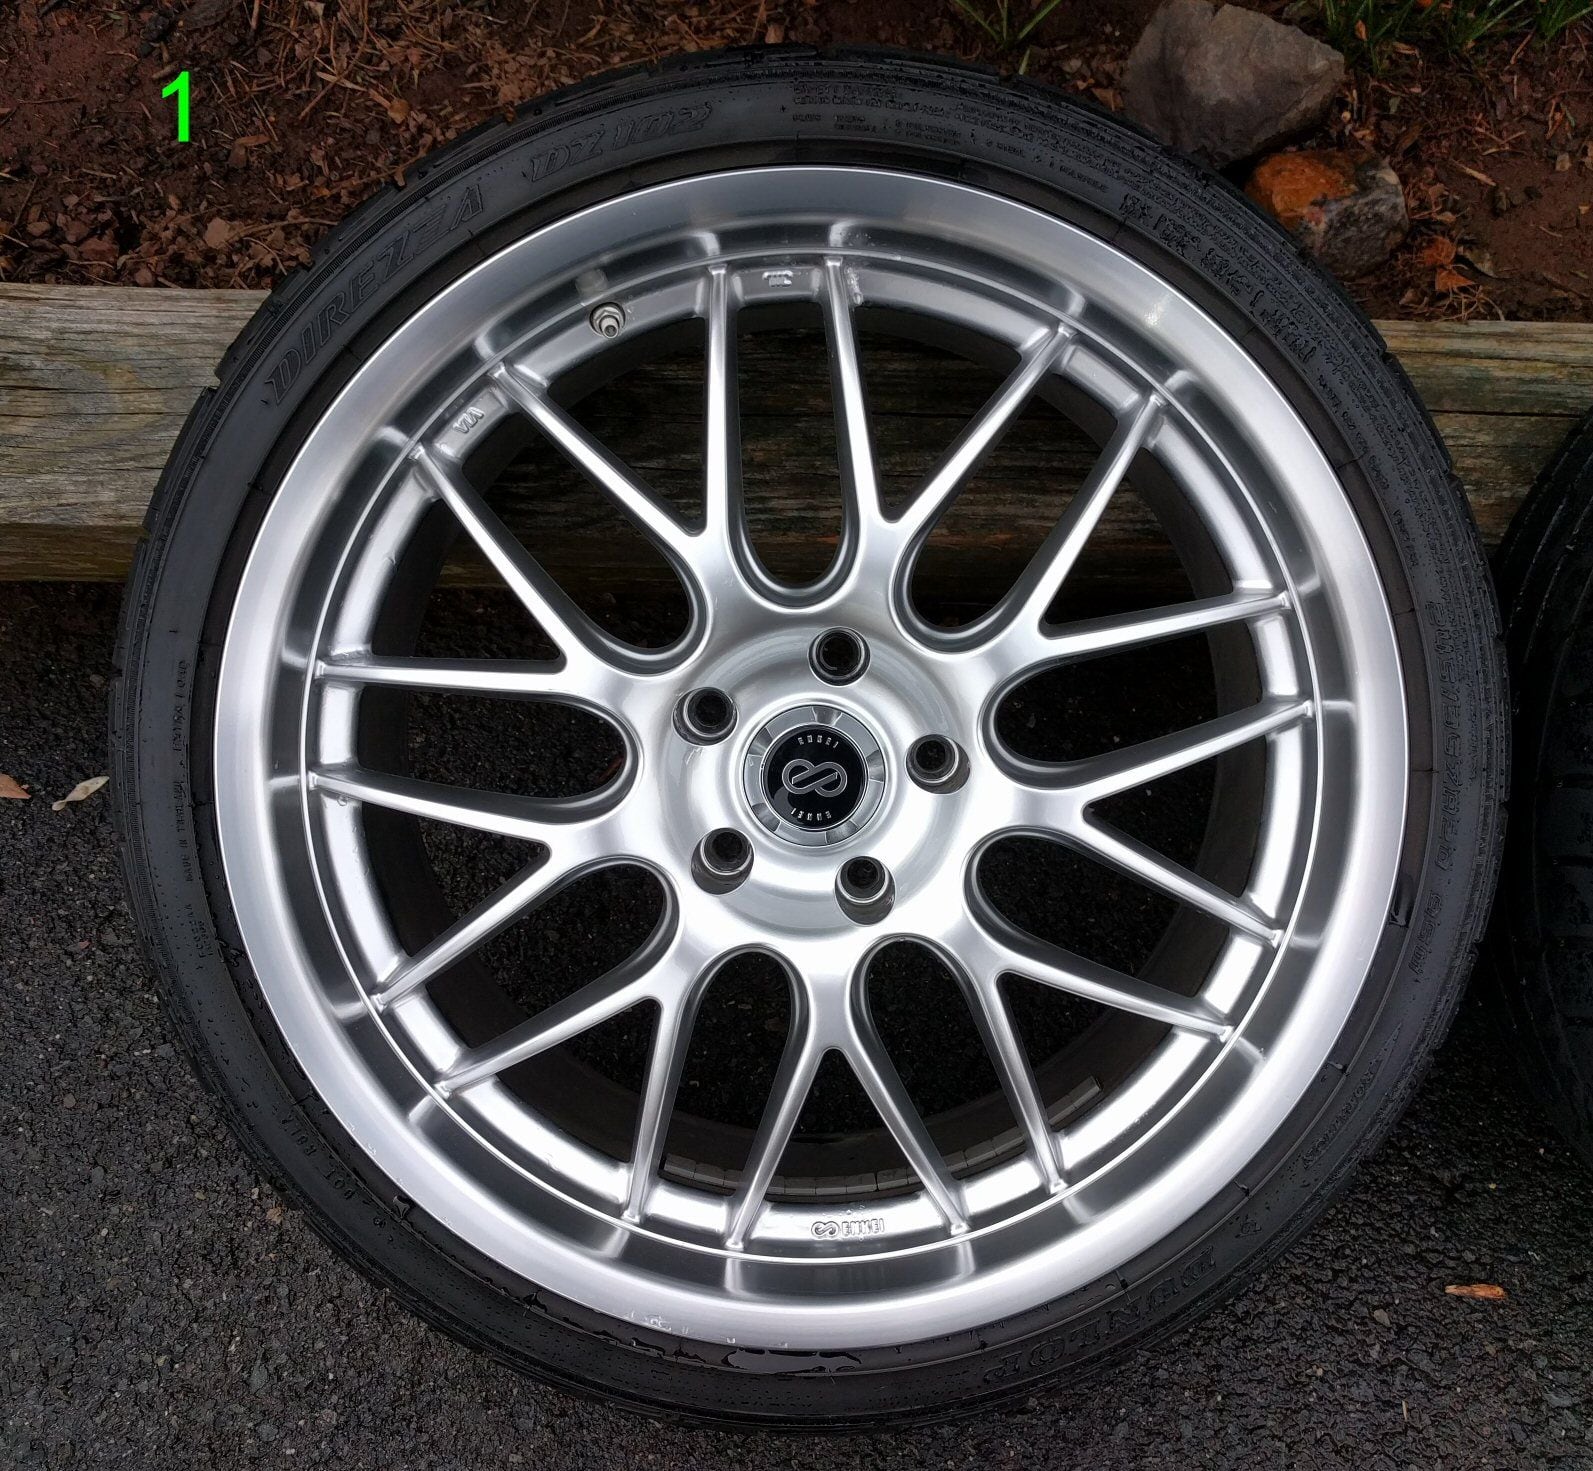 Wheels and Tires/Axles - SOLD: 20"x8.5"+40 5x120 EnkeiLussoSilver+245/35/20 Dunlop Direzza DZ102+TPMS+Parts - Used - 2009 to 2014 Acura TL - Morris/union County, NJ 07932, United States